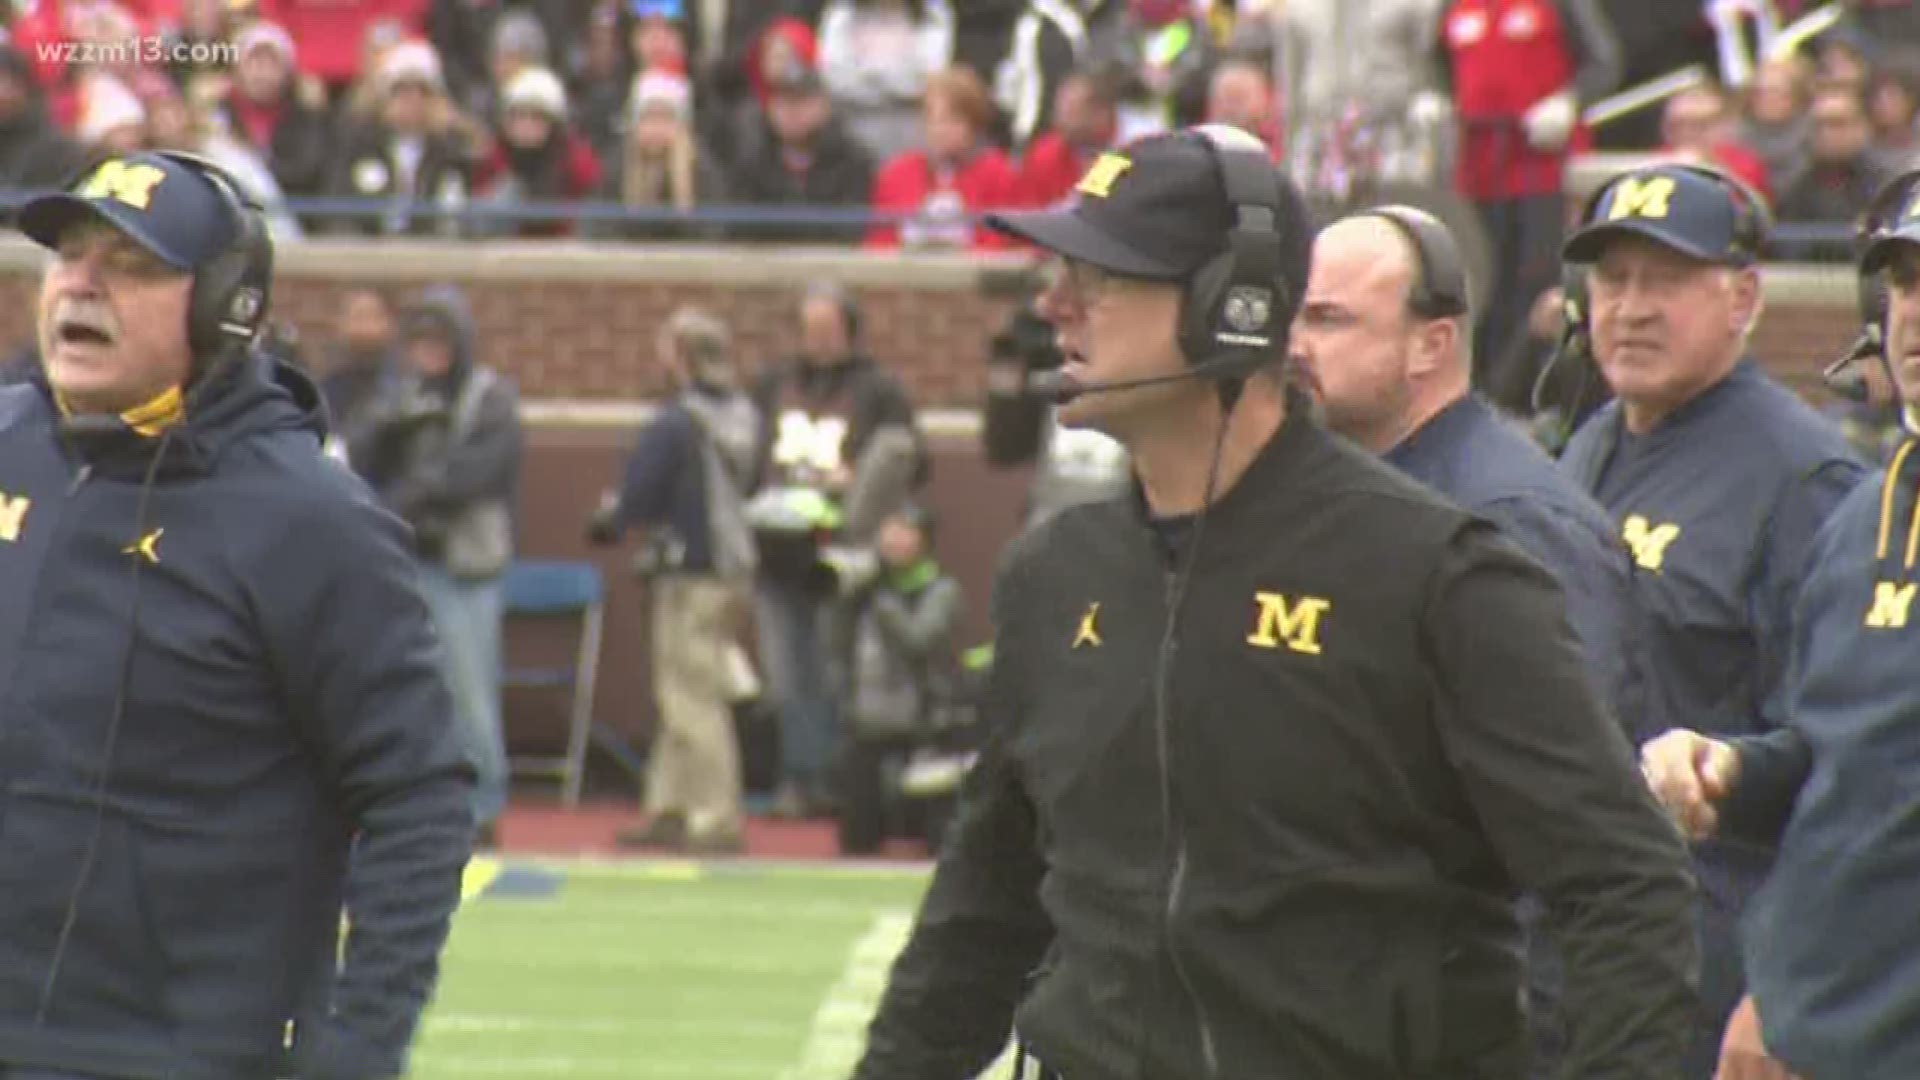 U of M police investigating former players tweets "threatening" Harbaugh